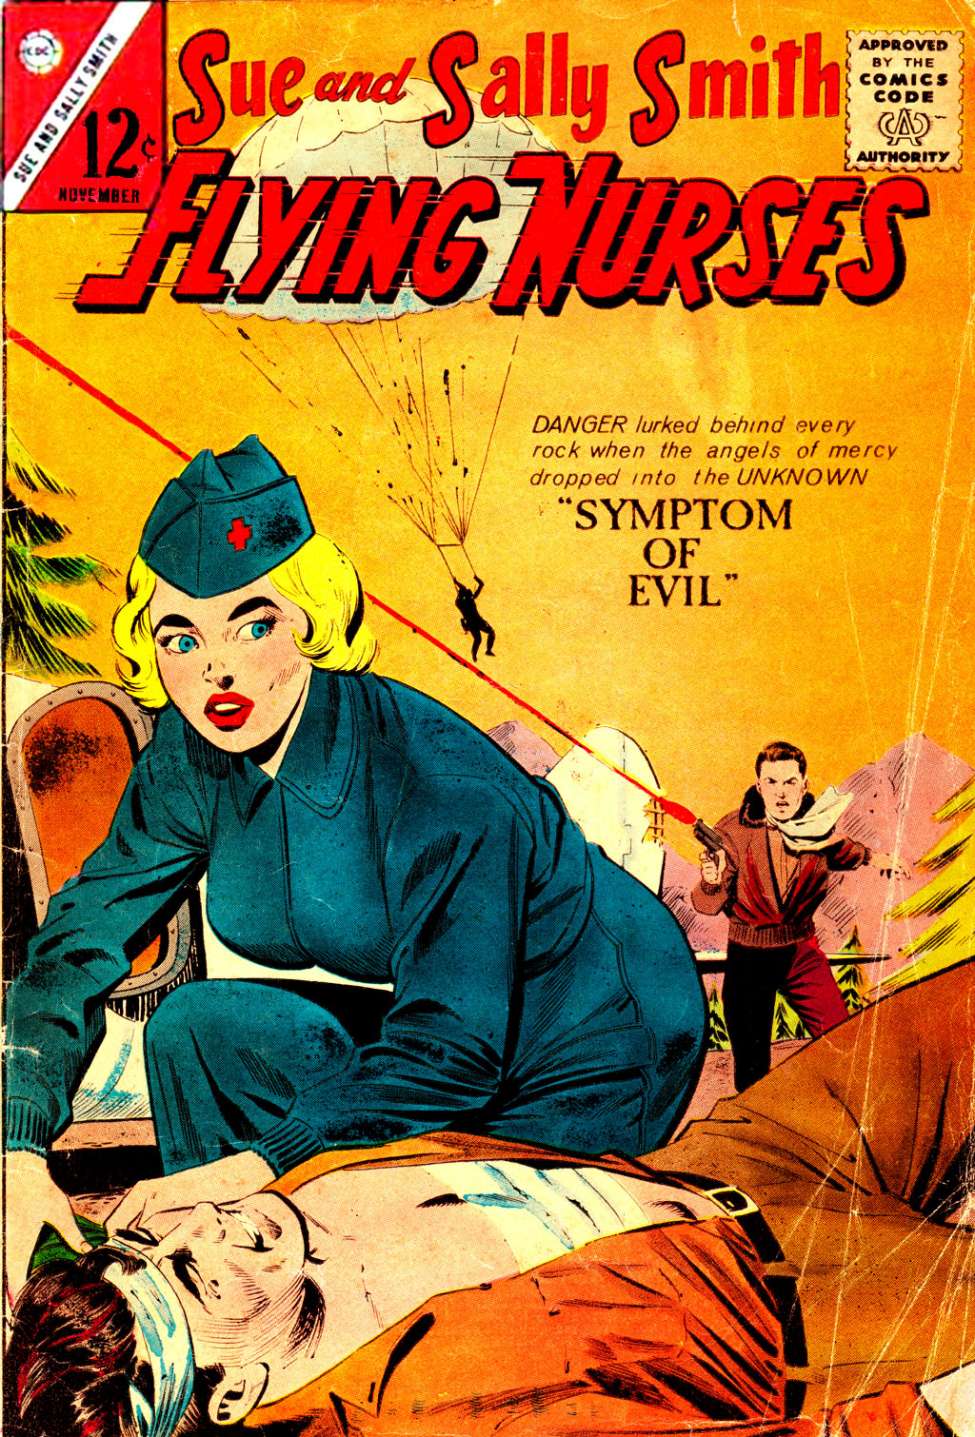 Book Cover For Sue and Sally Smith, Flying Nurses 54